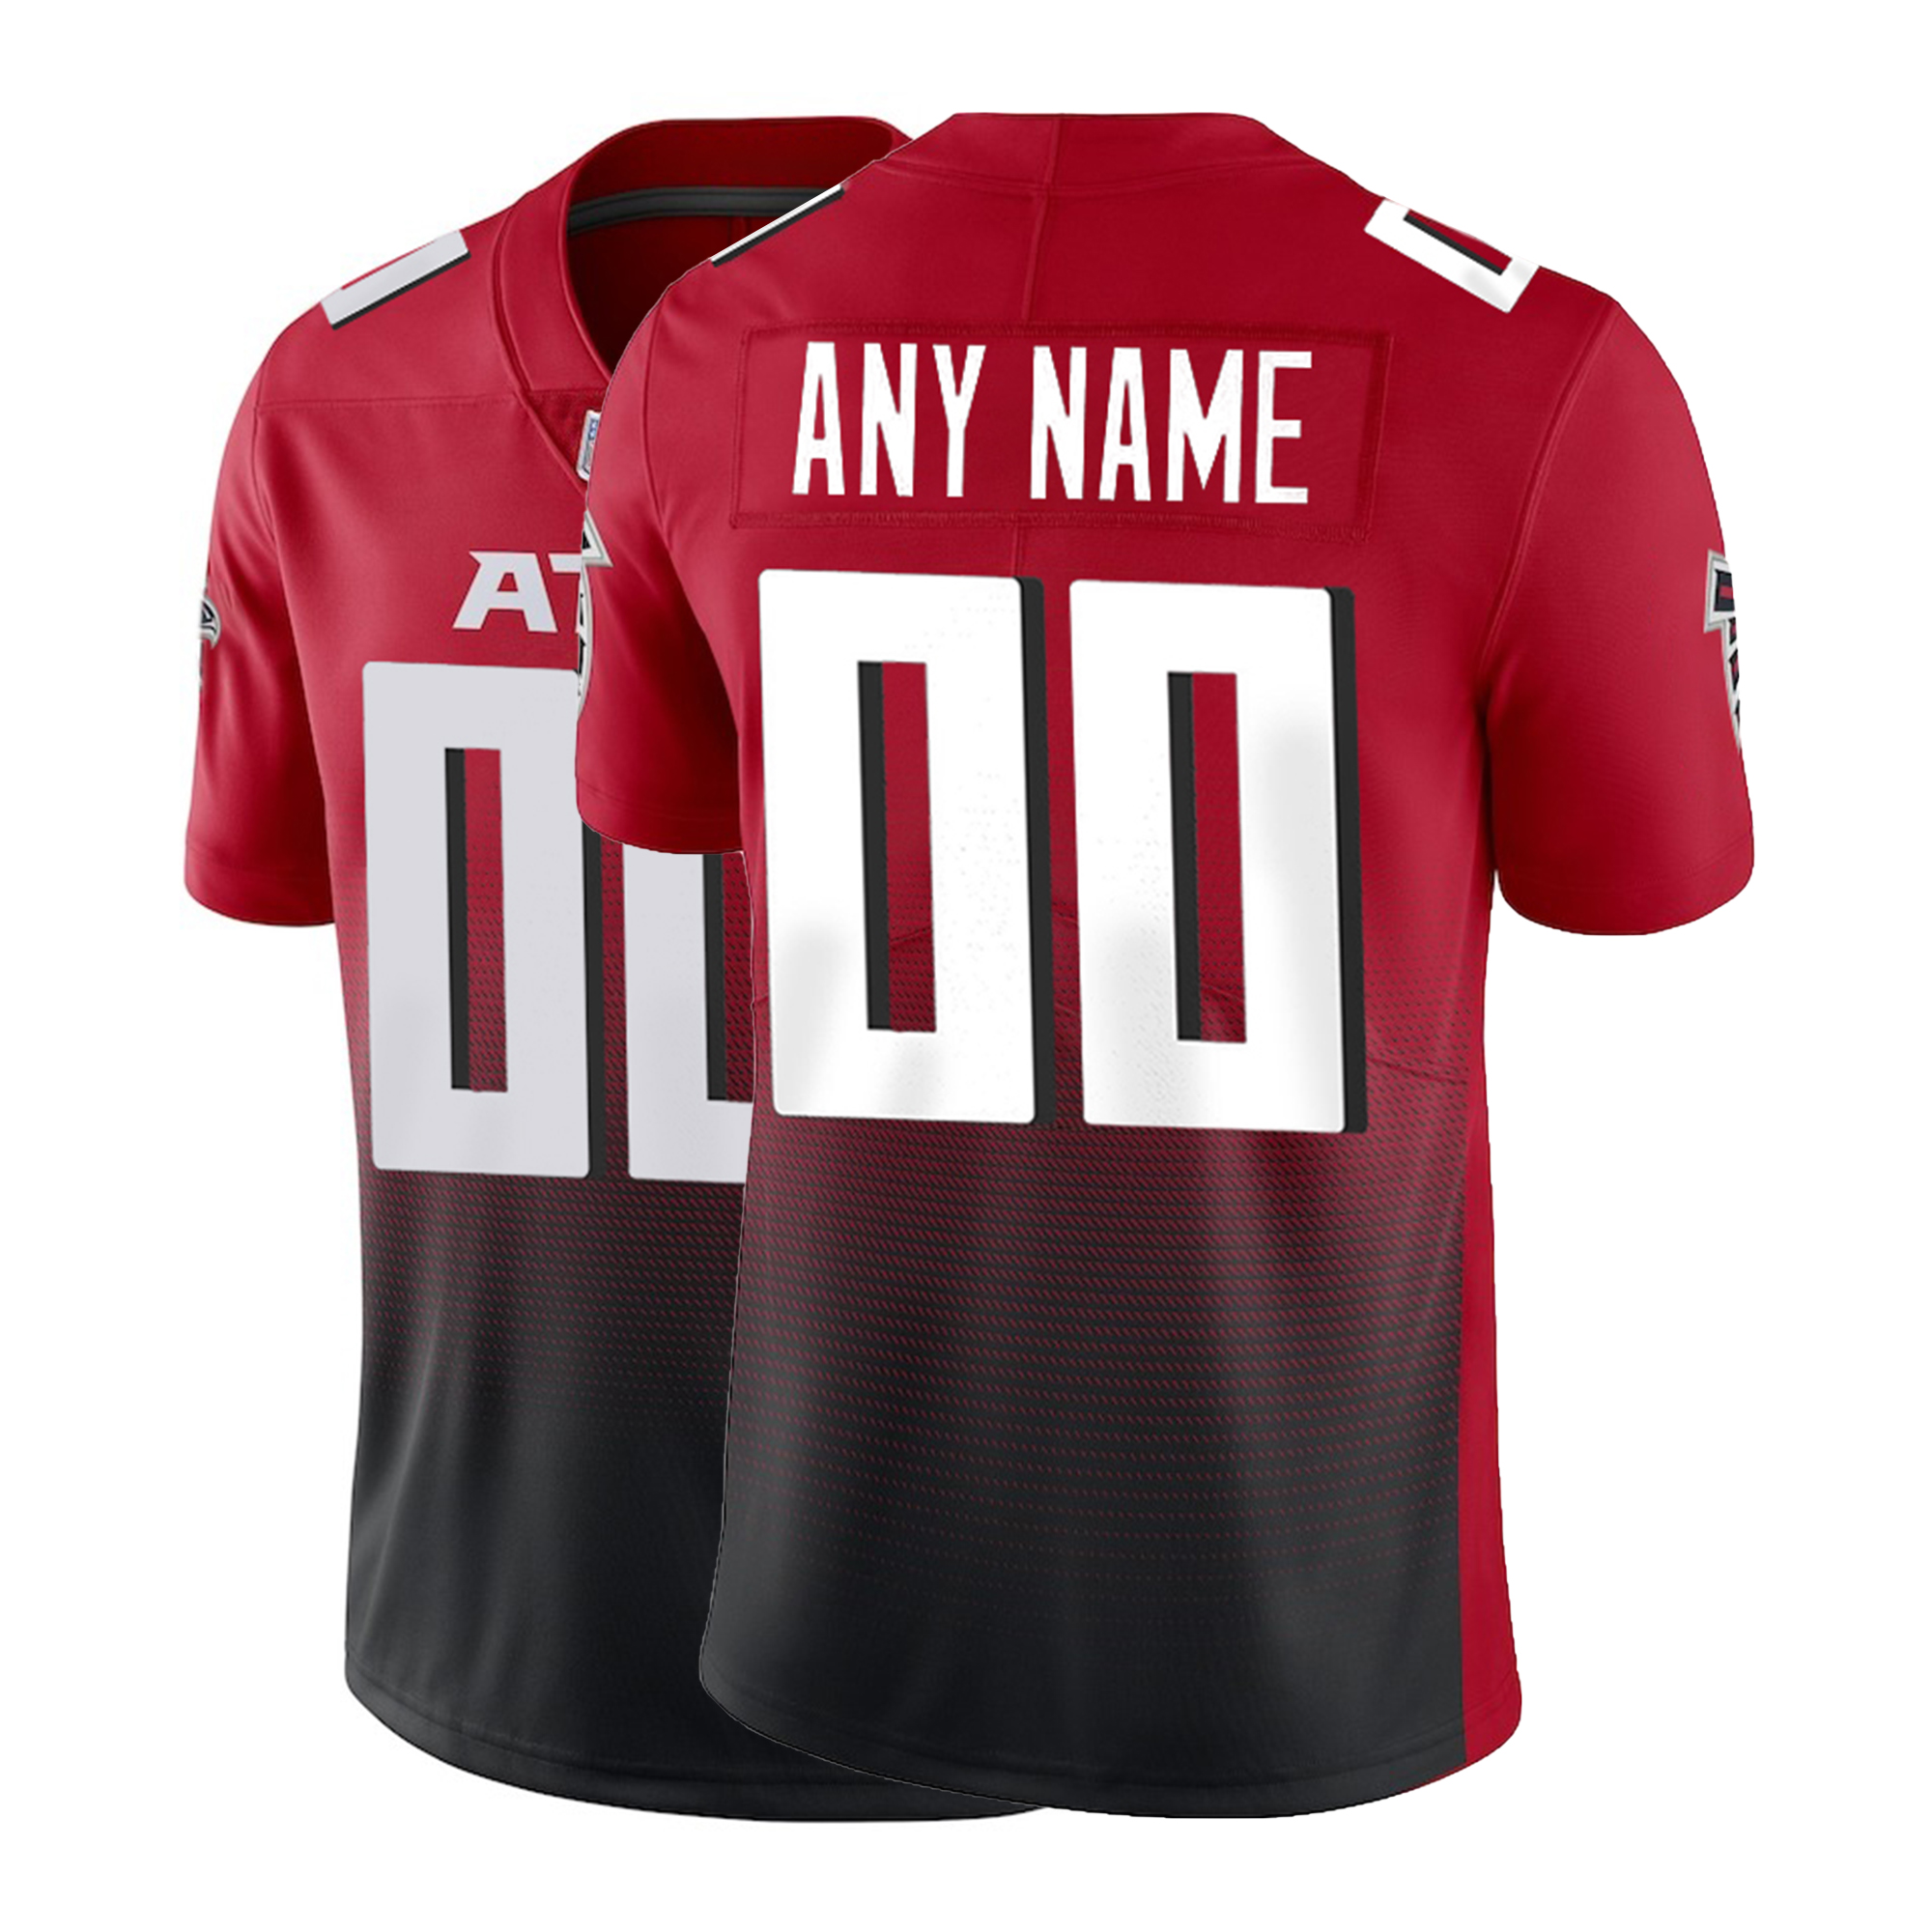 Atlanta Custom Jersey Football, Personalized Name & Number Men’s Jersey, Football Fans Limited Jersey, Football Atlanta Limited Jersey Gift for Fans